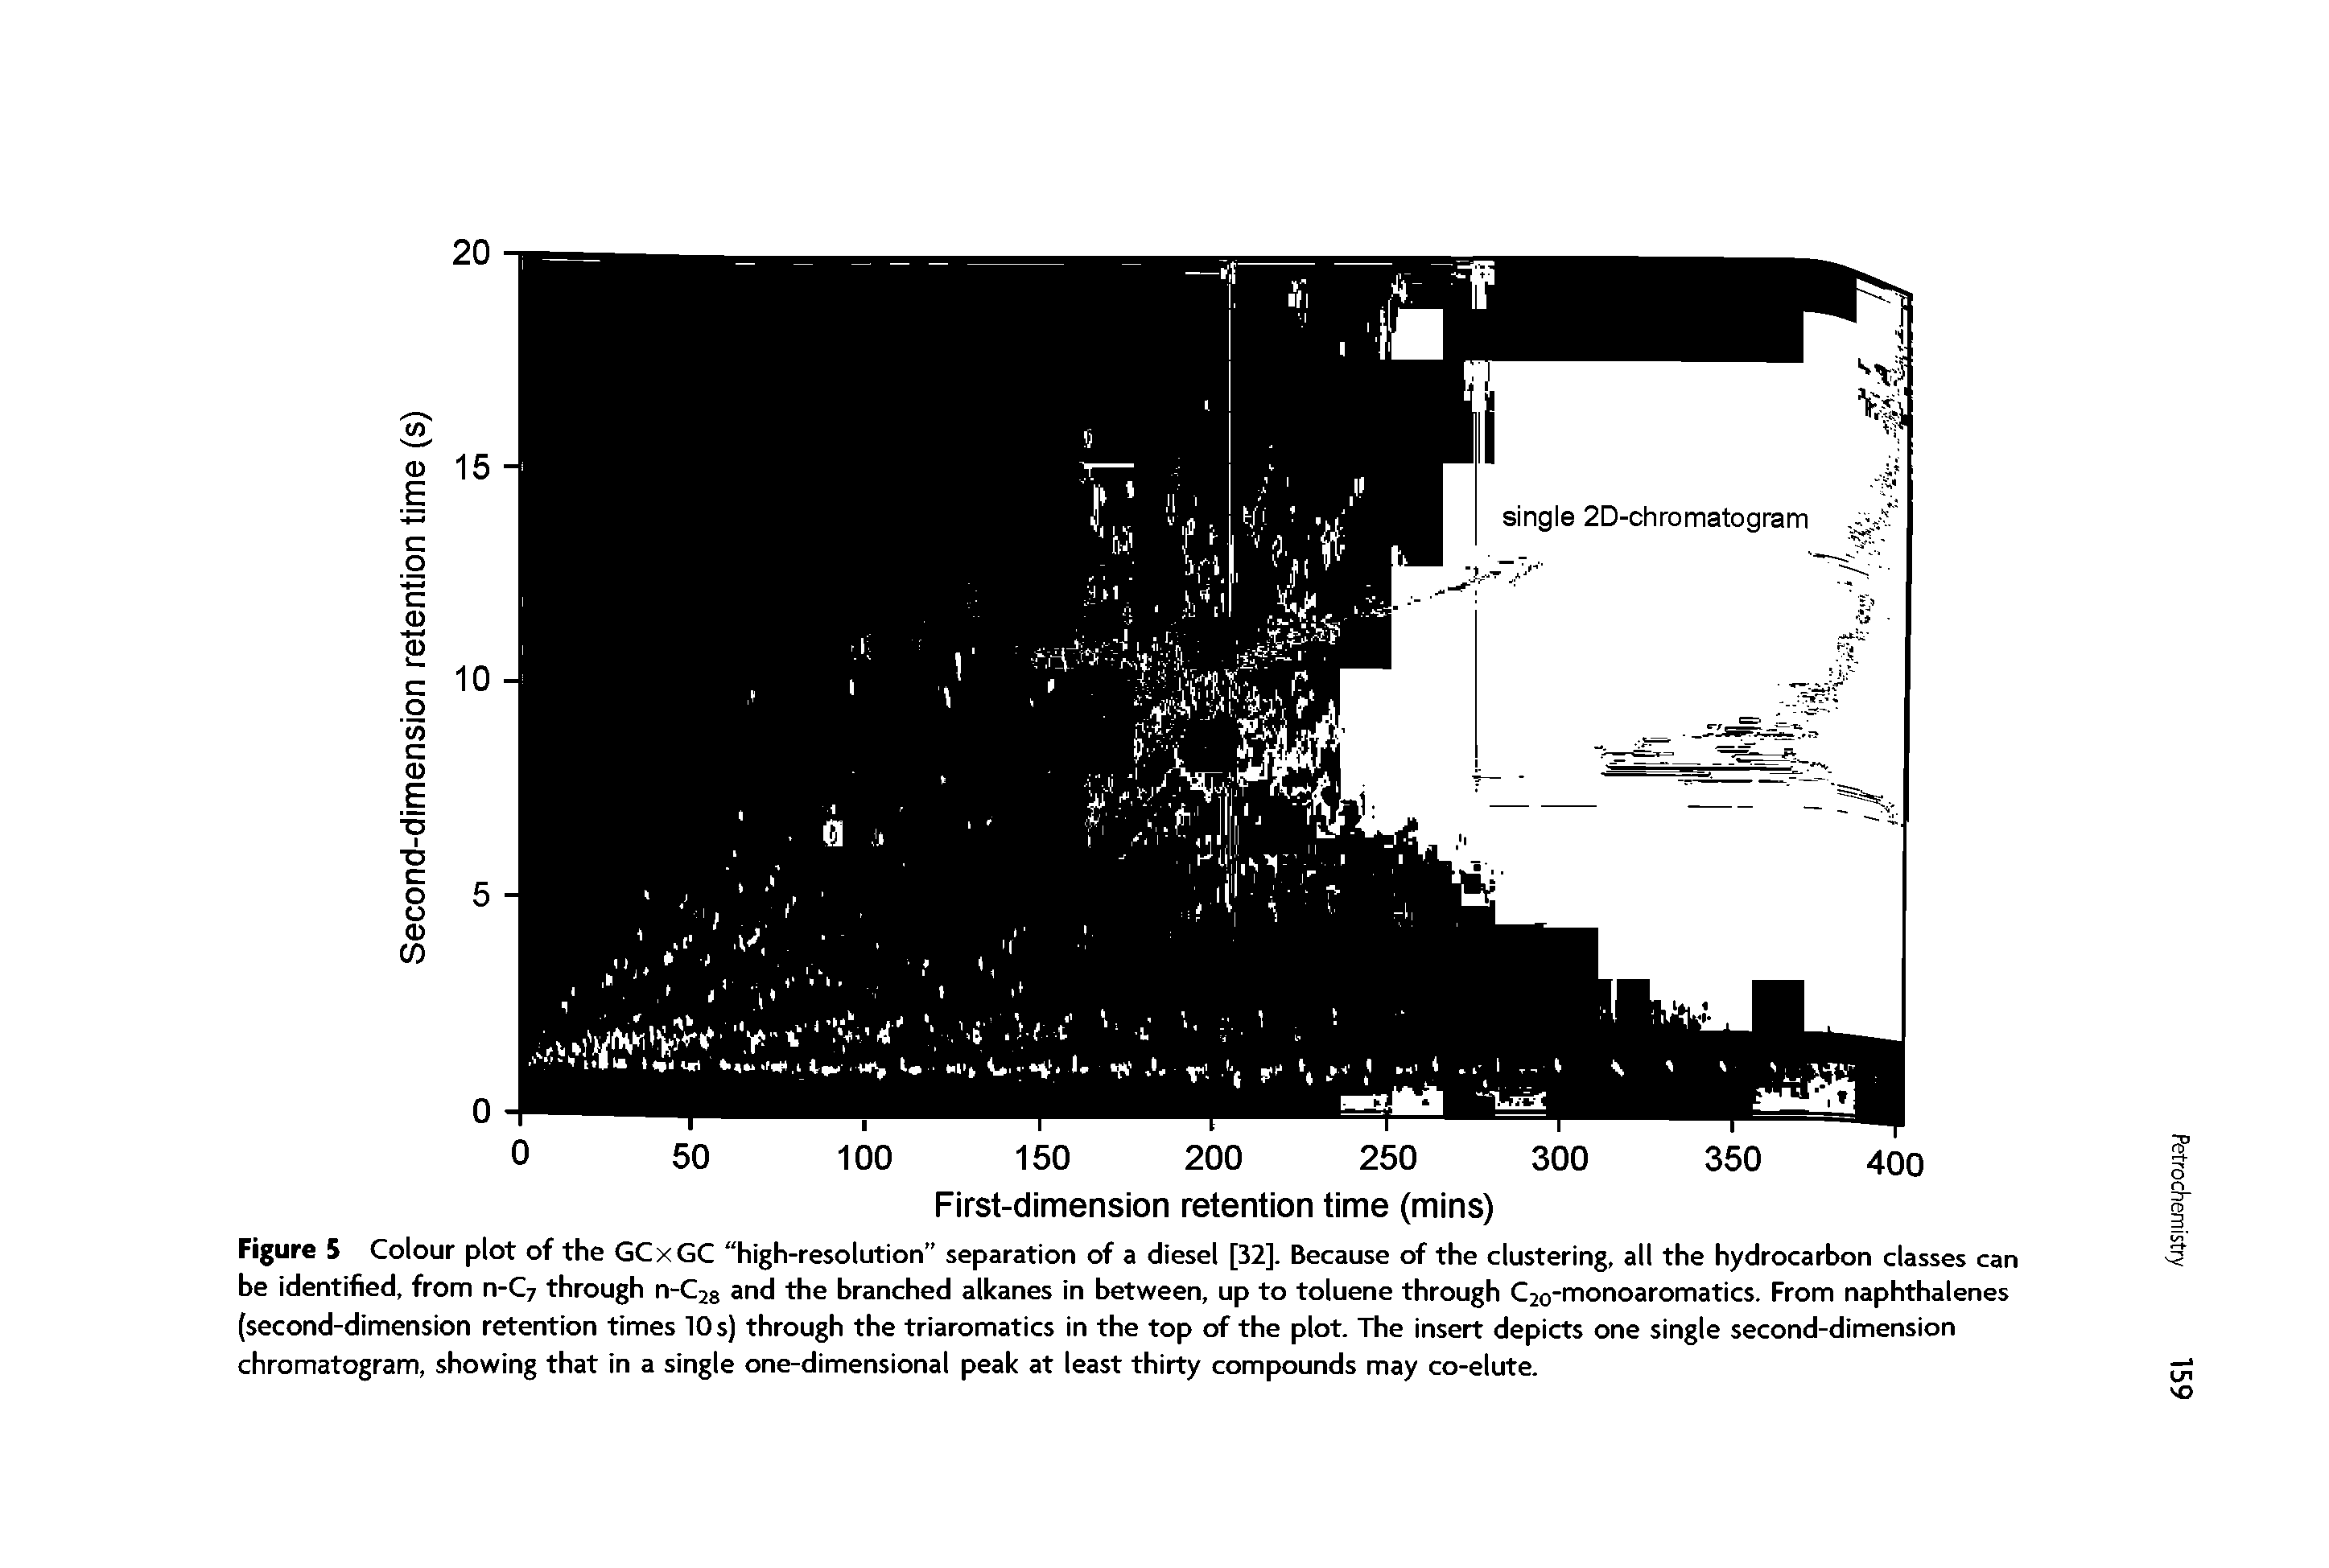 Figure 5 Colour plot of the GCxGC high-resolution separation of a diesel [32]. Because of the clustering, all the hydrocarbon classes can be identified, from n-C7 through n-Cjg and the branched alkanes in between, up to toluene through C2o-monoaromatics. From naphthalenes (second-dimension retention times 10 s) through the triaromatics in the top of the plot. The insert depicts one single second-dimension chromatogram, showing that in a single one-dimensional peak at least thirty compounds may co-elute.